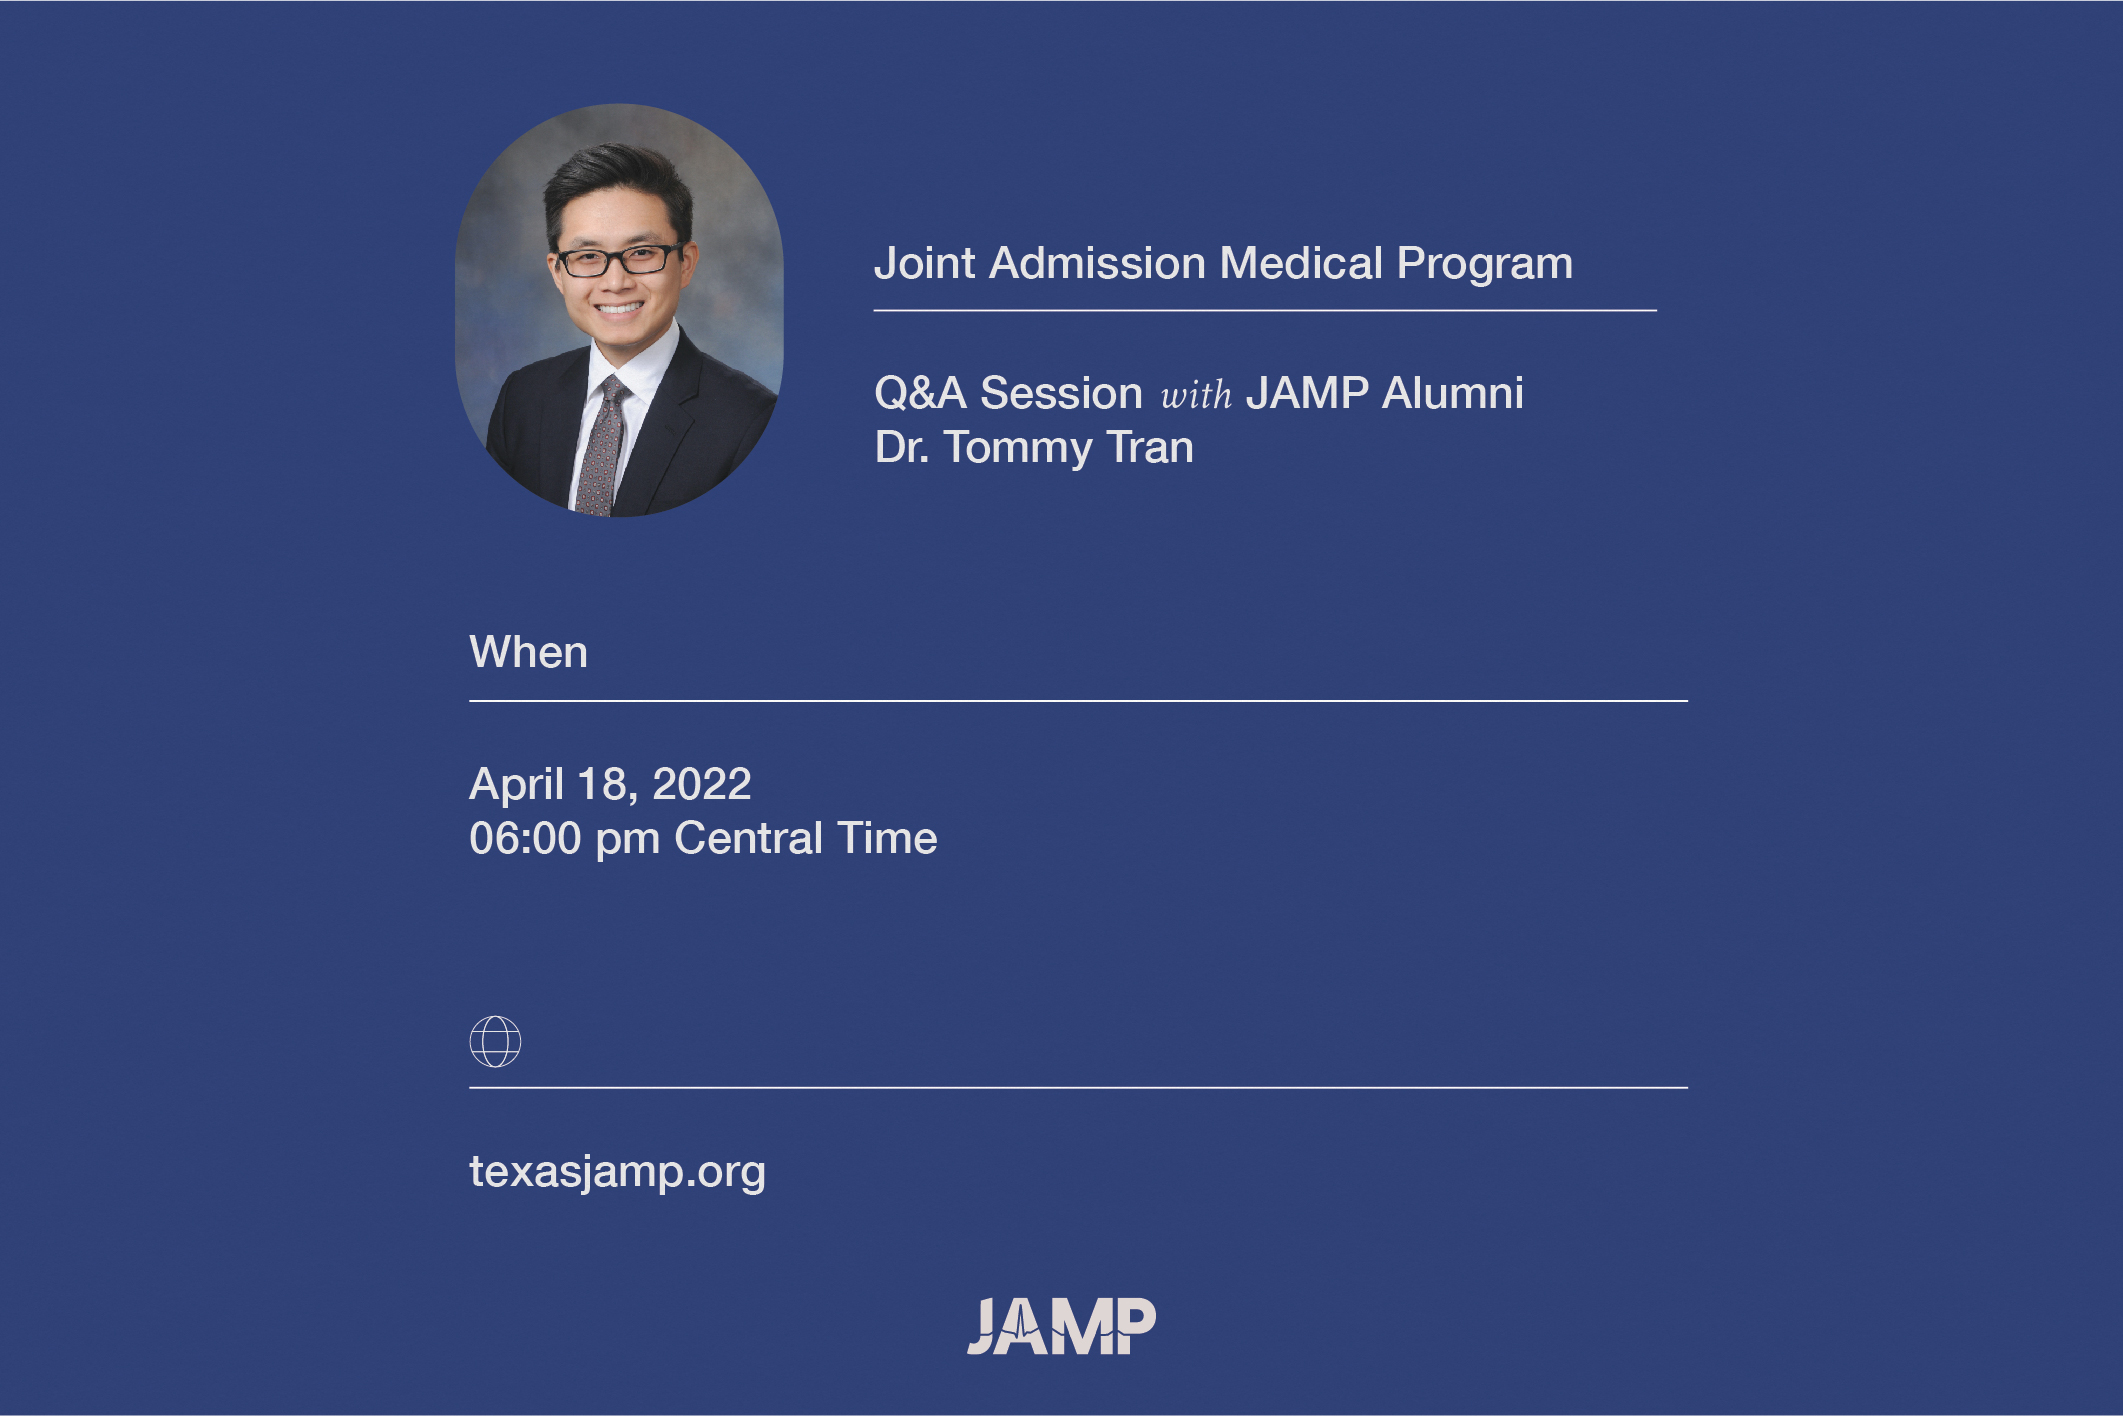 JAMP Info Session with Dr. Tommy Tran